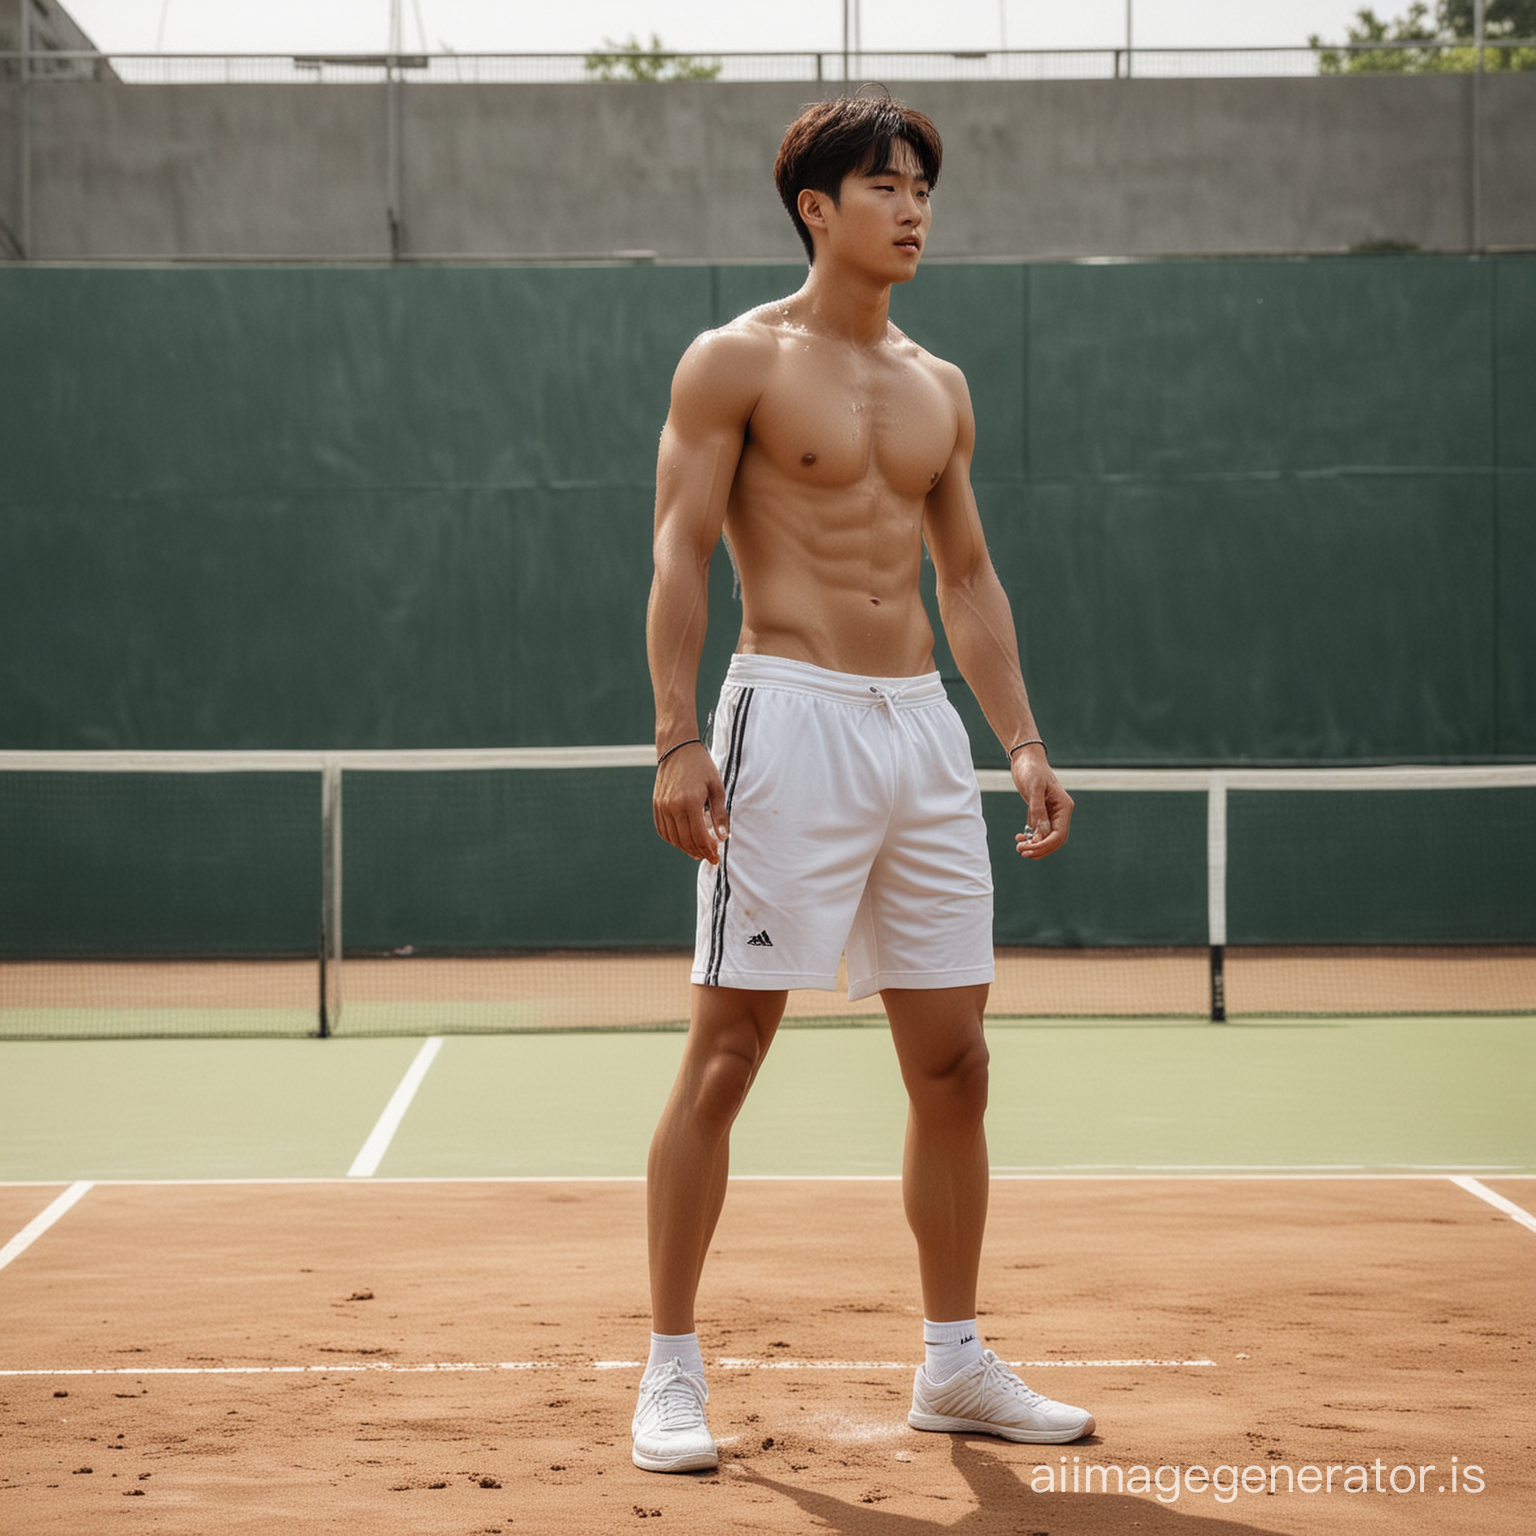 A 21-year-old muscular korean boy on the tennis court, his clothes drenched in sweat, barefoot, no shoes